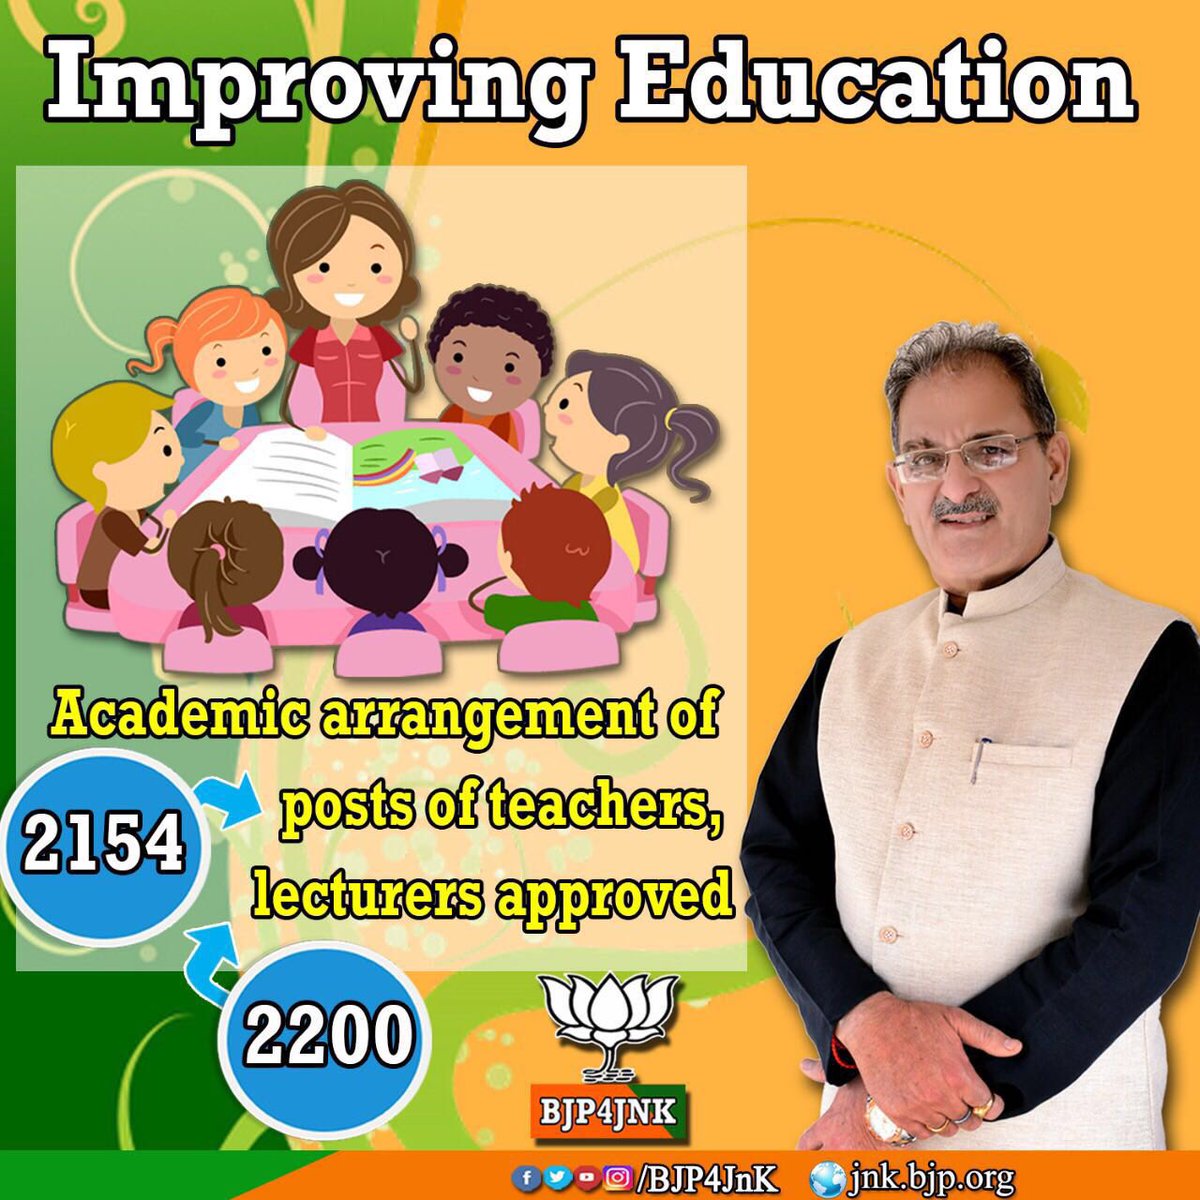 #ImprovingEducation
Academic arrangements of 2154 posts of teachers, 2200 lecturers approved.